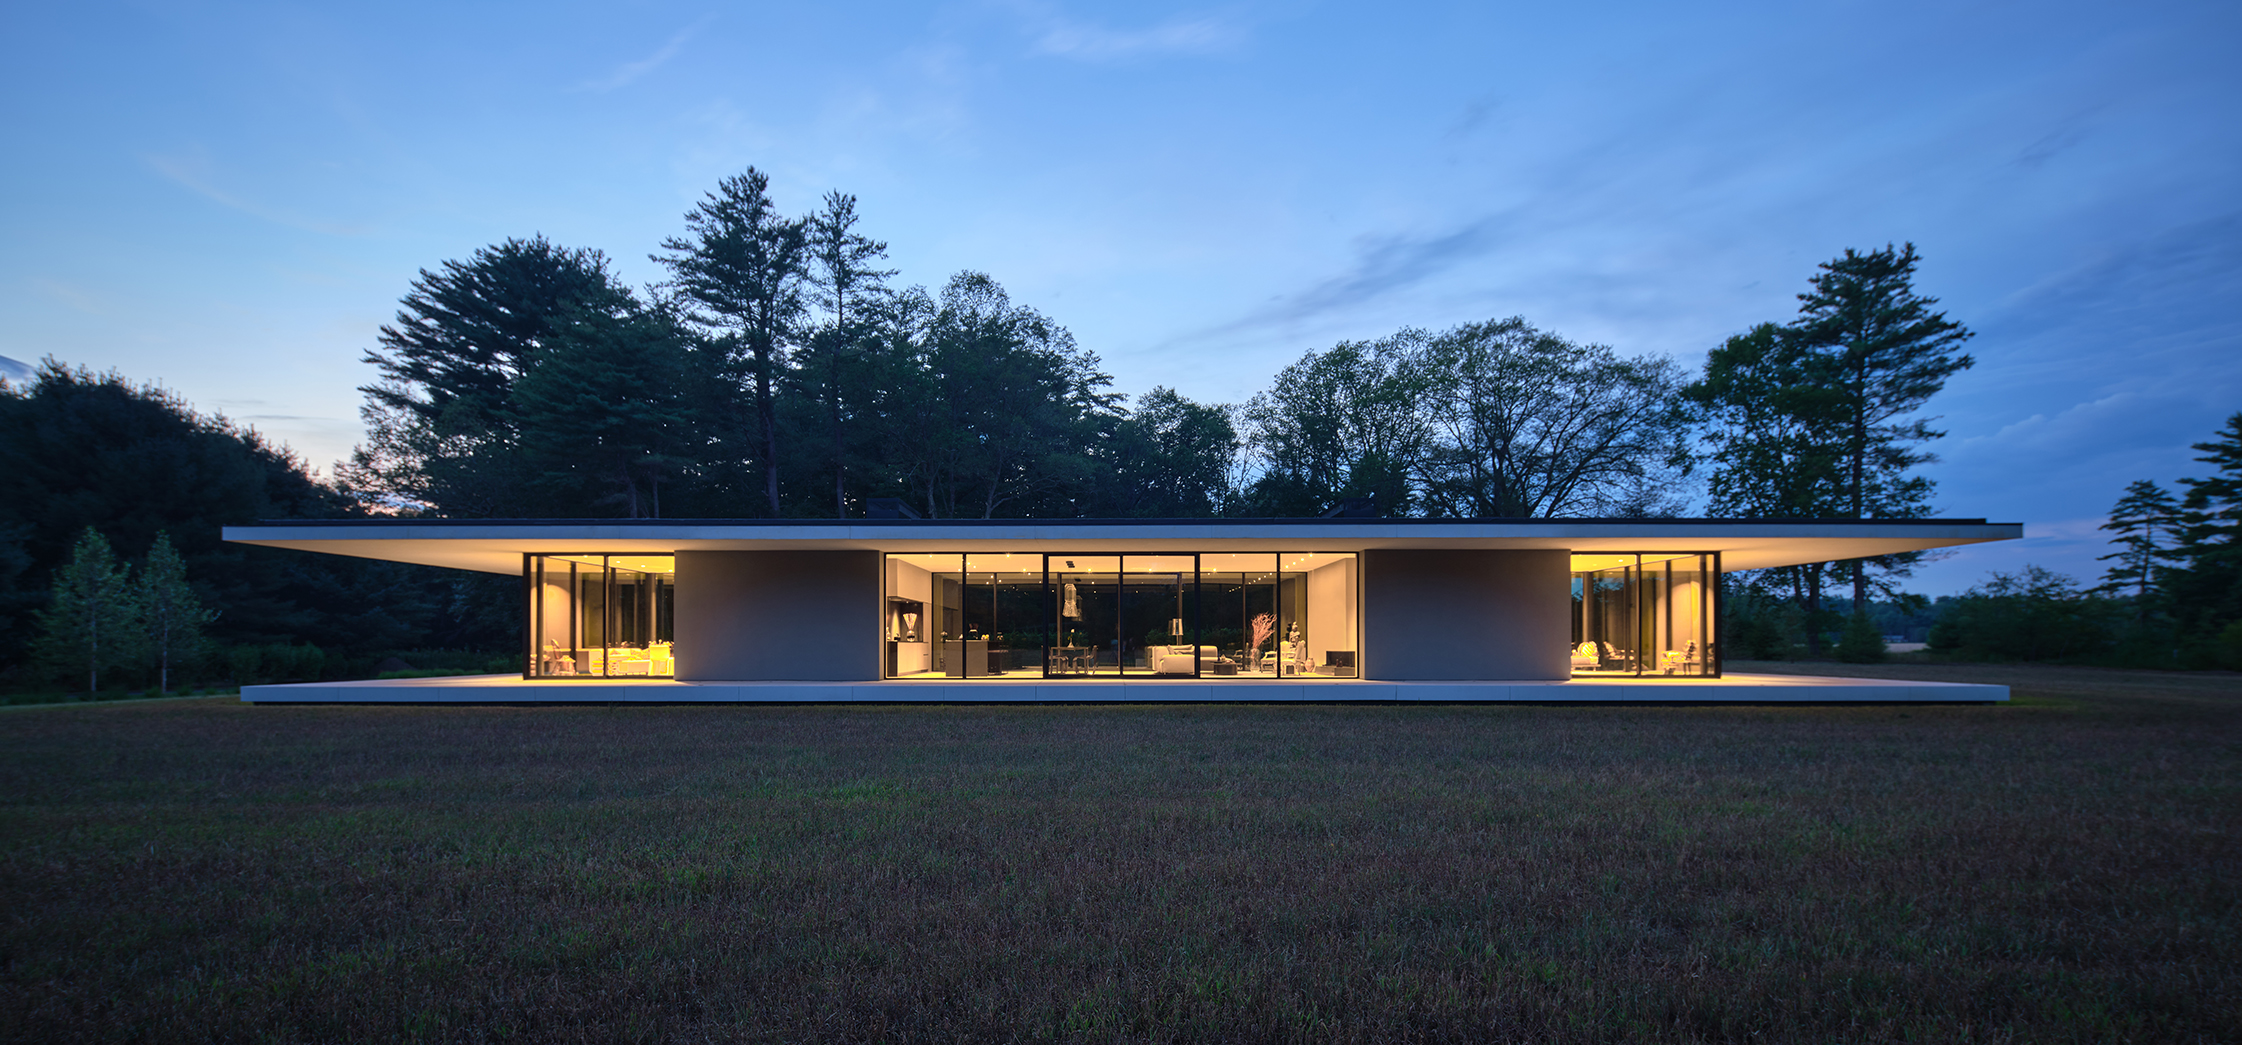 A symmetrical modern glass house sits in a field at dusk; the interior is lit and visible through the large glass windows.